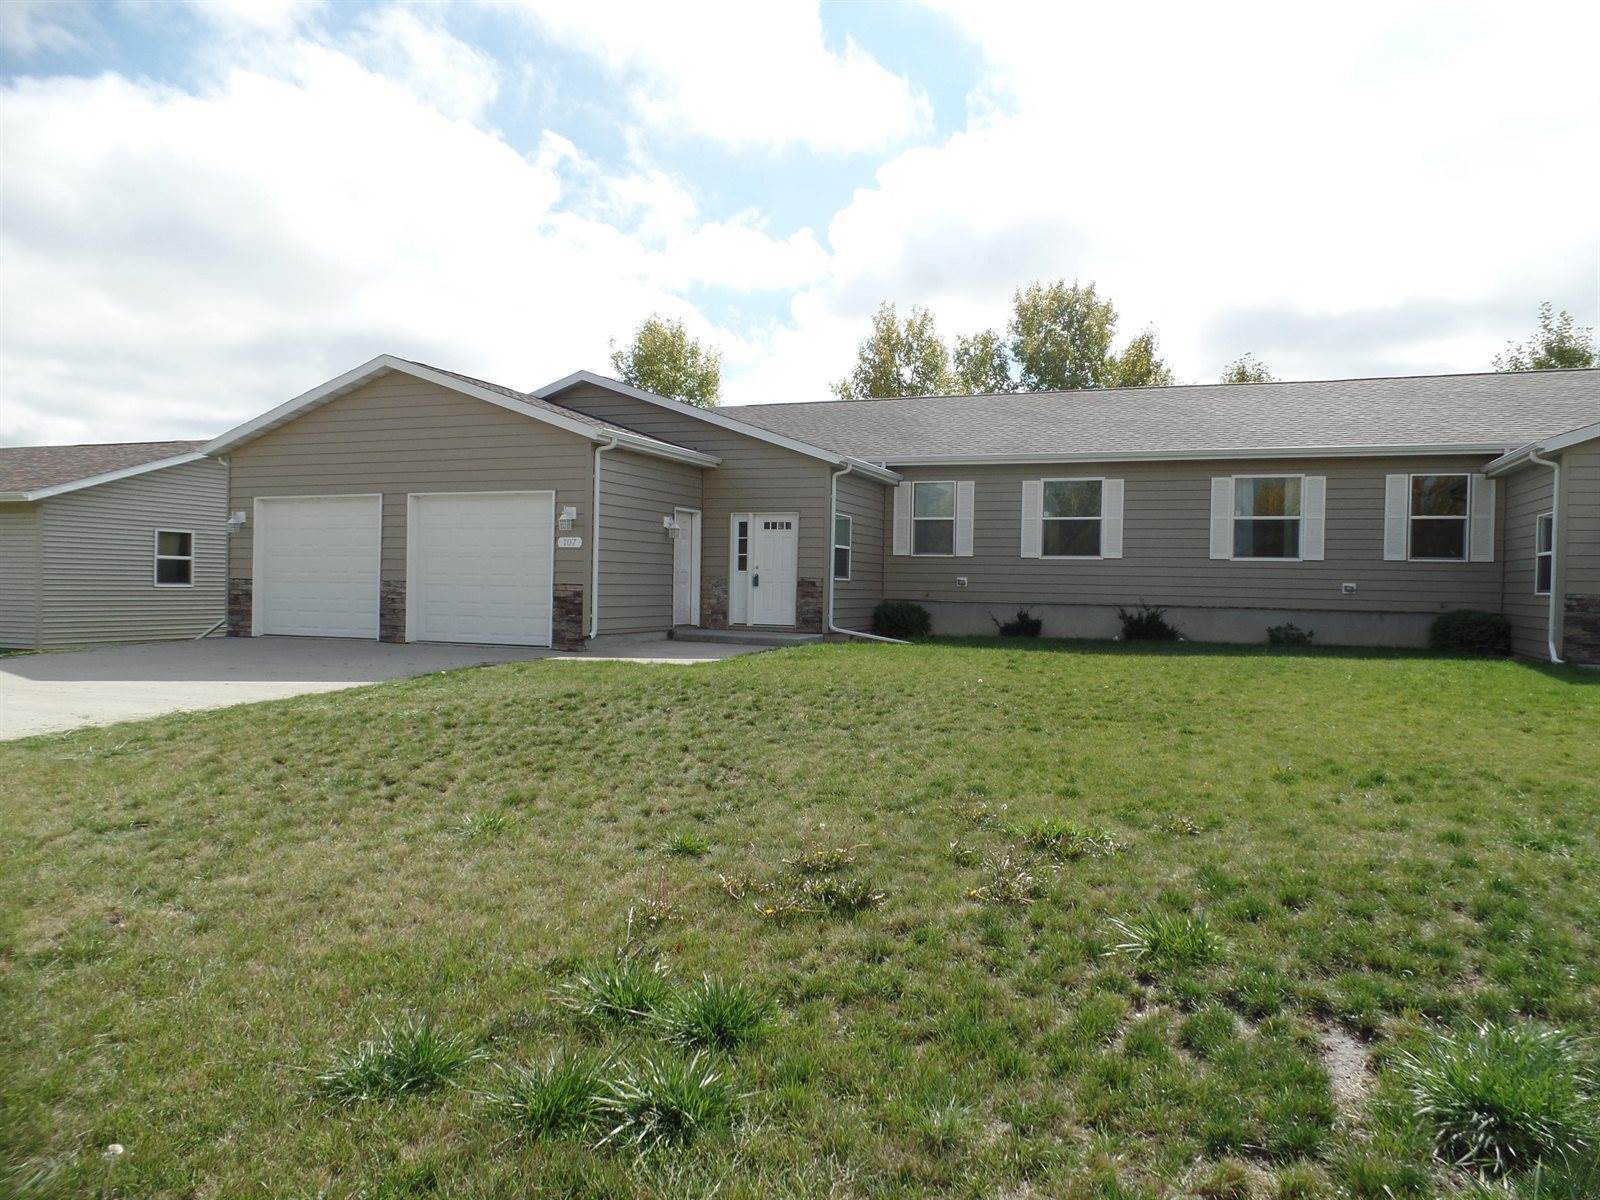 107 16th Street NW, Beulah, ND 58523